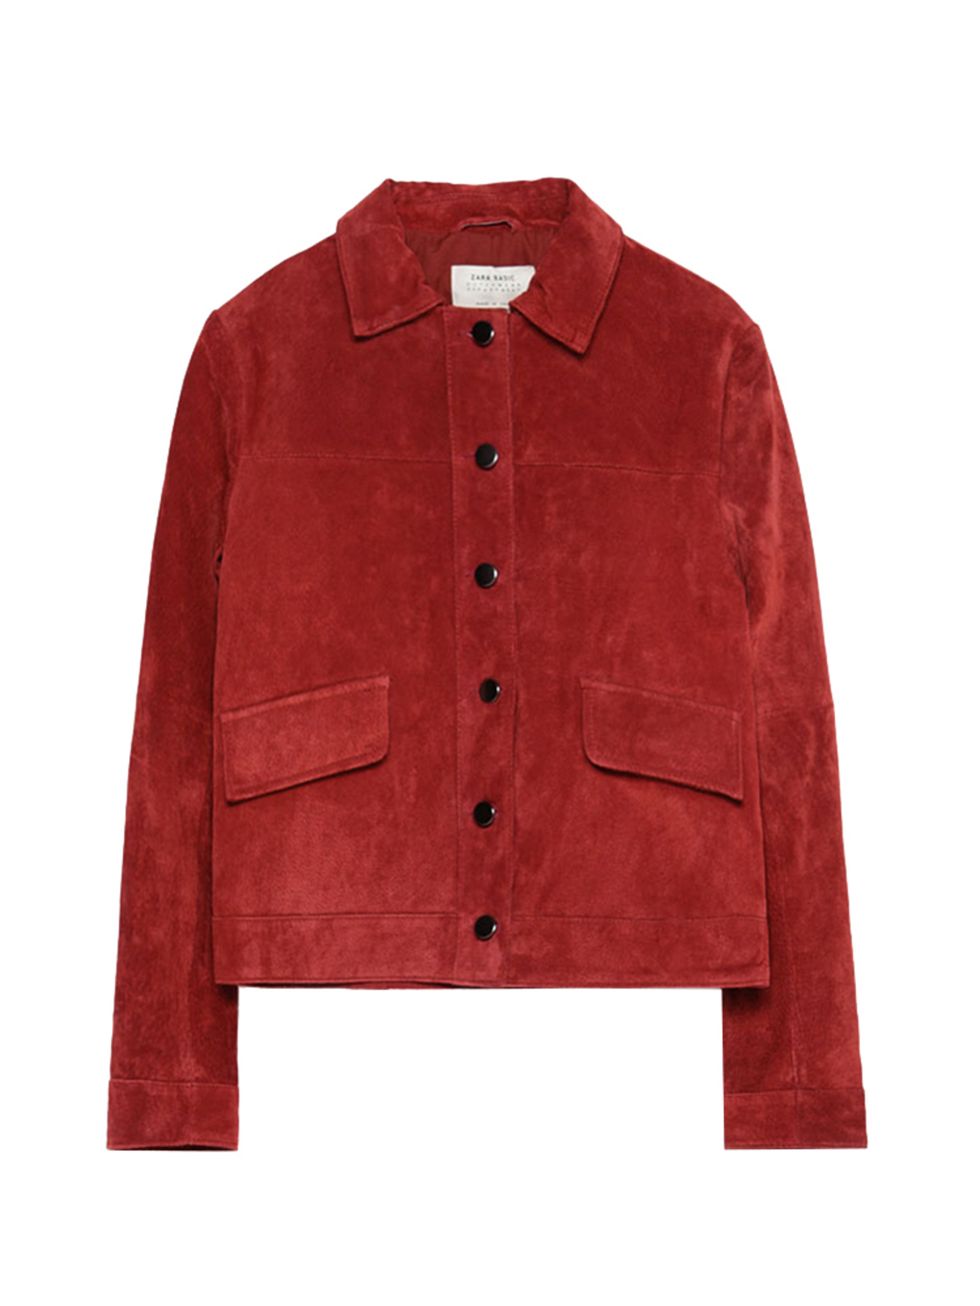 <p><a href="http://www.zara.com/uk/en/collection-aw15/woman/new-this-week/suede-jacket-c744532p2822550.html" target="_blank">Zara</a> jacket, £59.99</p>